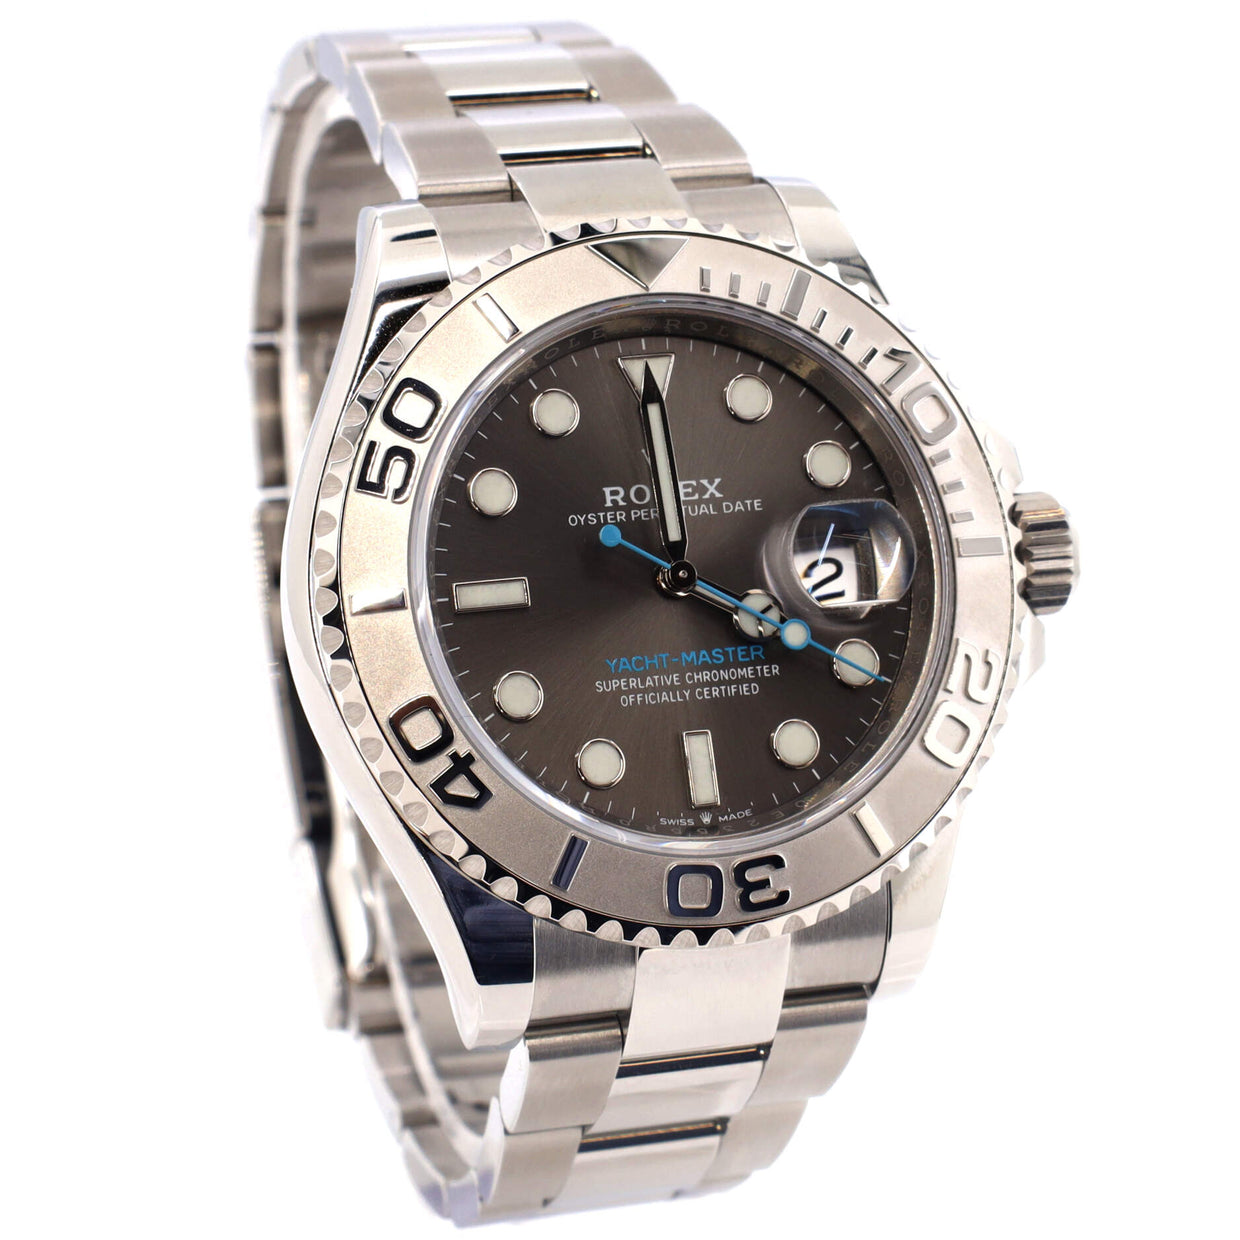 Rolex Oyster Perpetual Yacht-Master Slate Automatic Watch Stainless ...